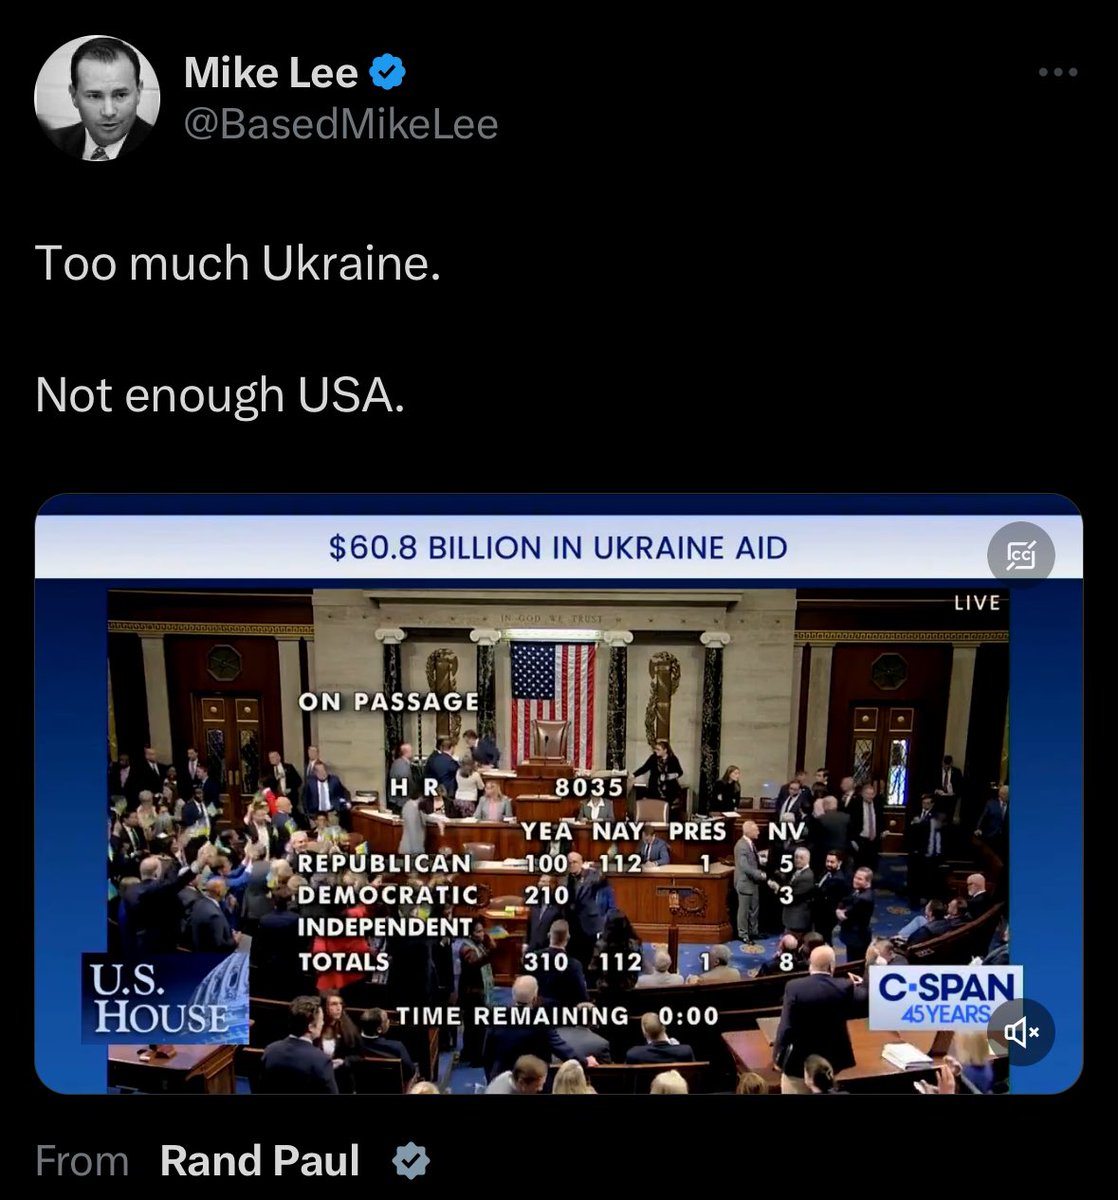 Mike Lee slurps on Putin’s kolbasa 24/7. Of course he has the sadz about the passage of aid to Ukraine. Not just a tool, but a tool of Putin. All day, every day.